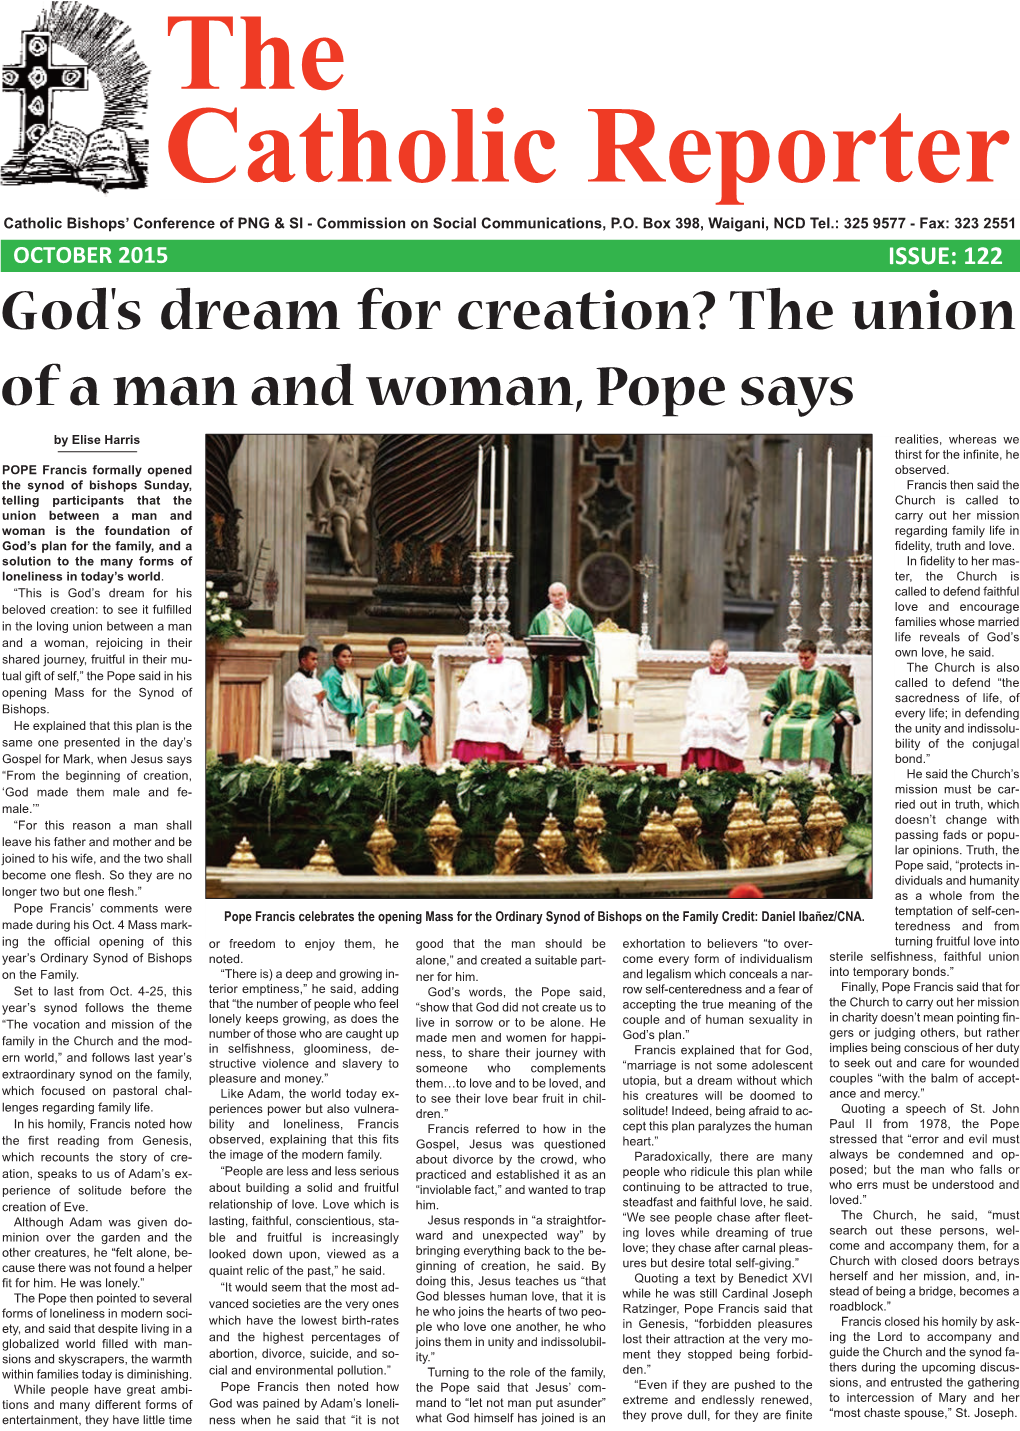 God's Dream for Creation? the Union of a Man and Woman, Pope Says